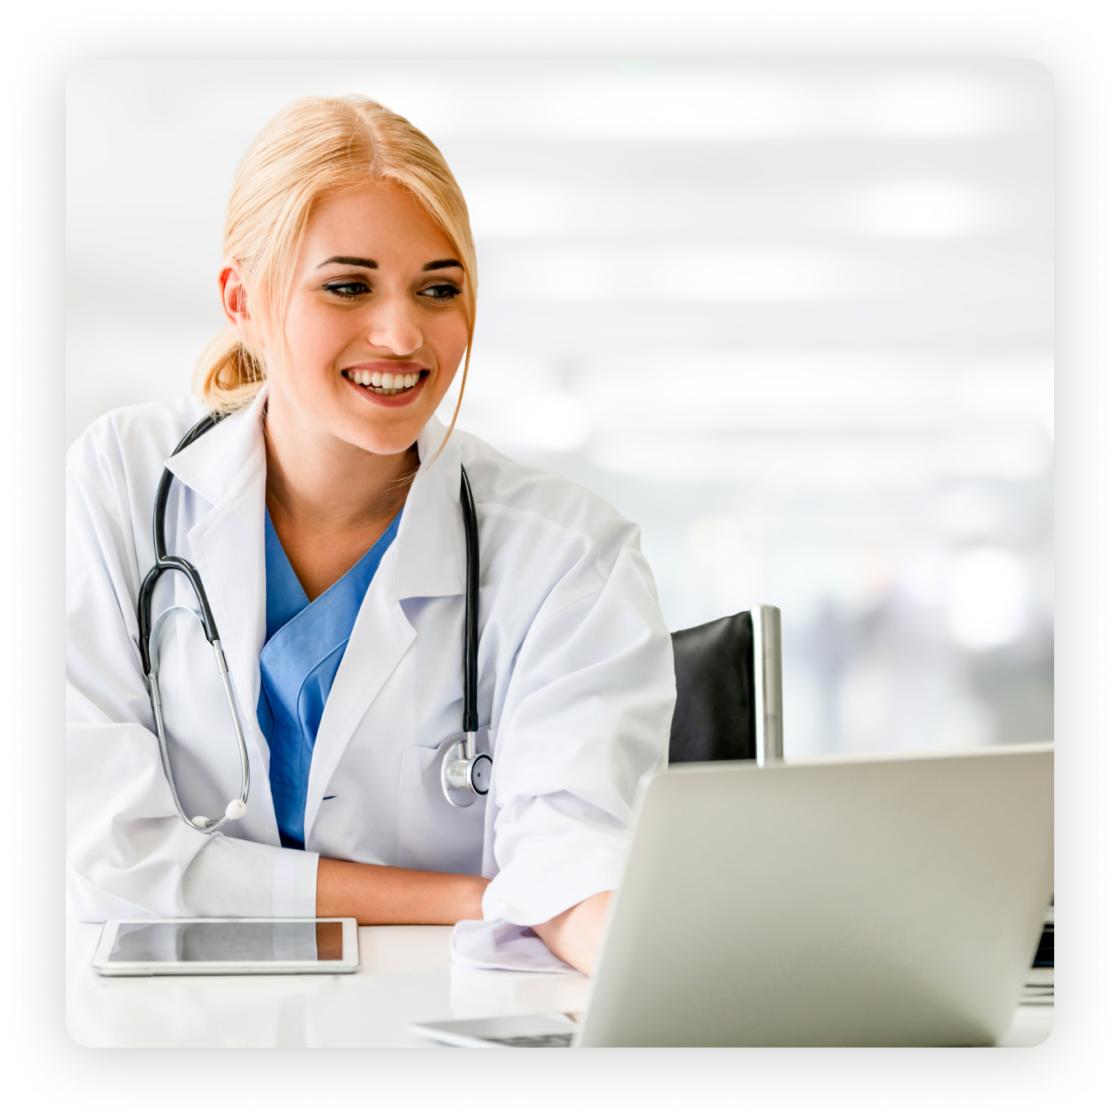 With OhMD's AdvancedMD integration the patient conversations you have through text message and other OhMD communication tools can be pushed back to the patient chart in the EHR in a click.